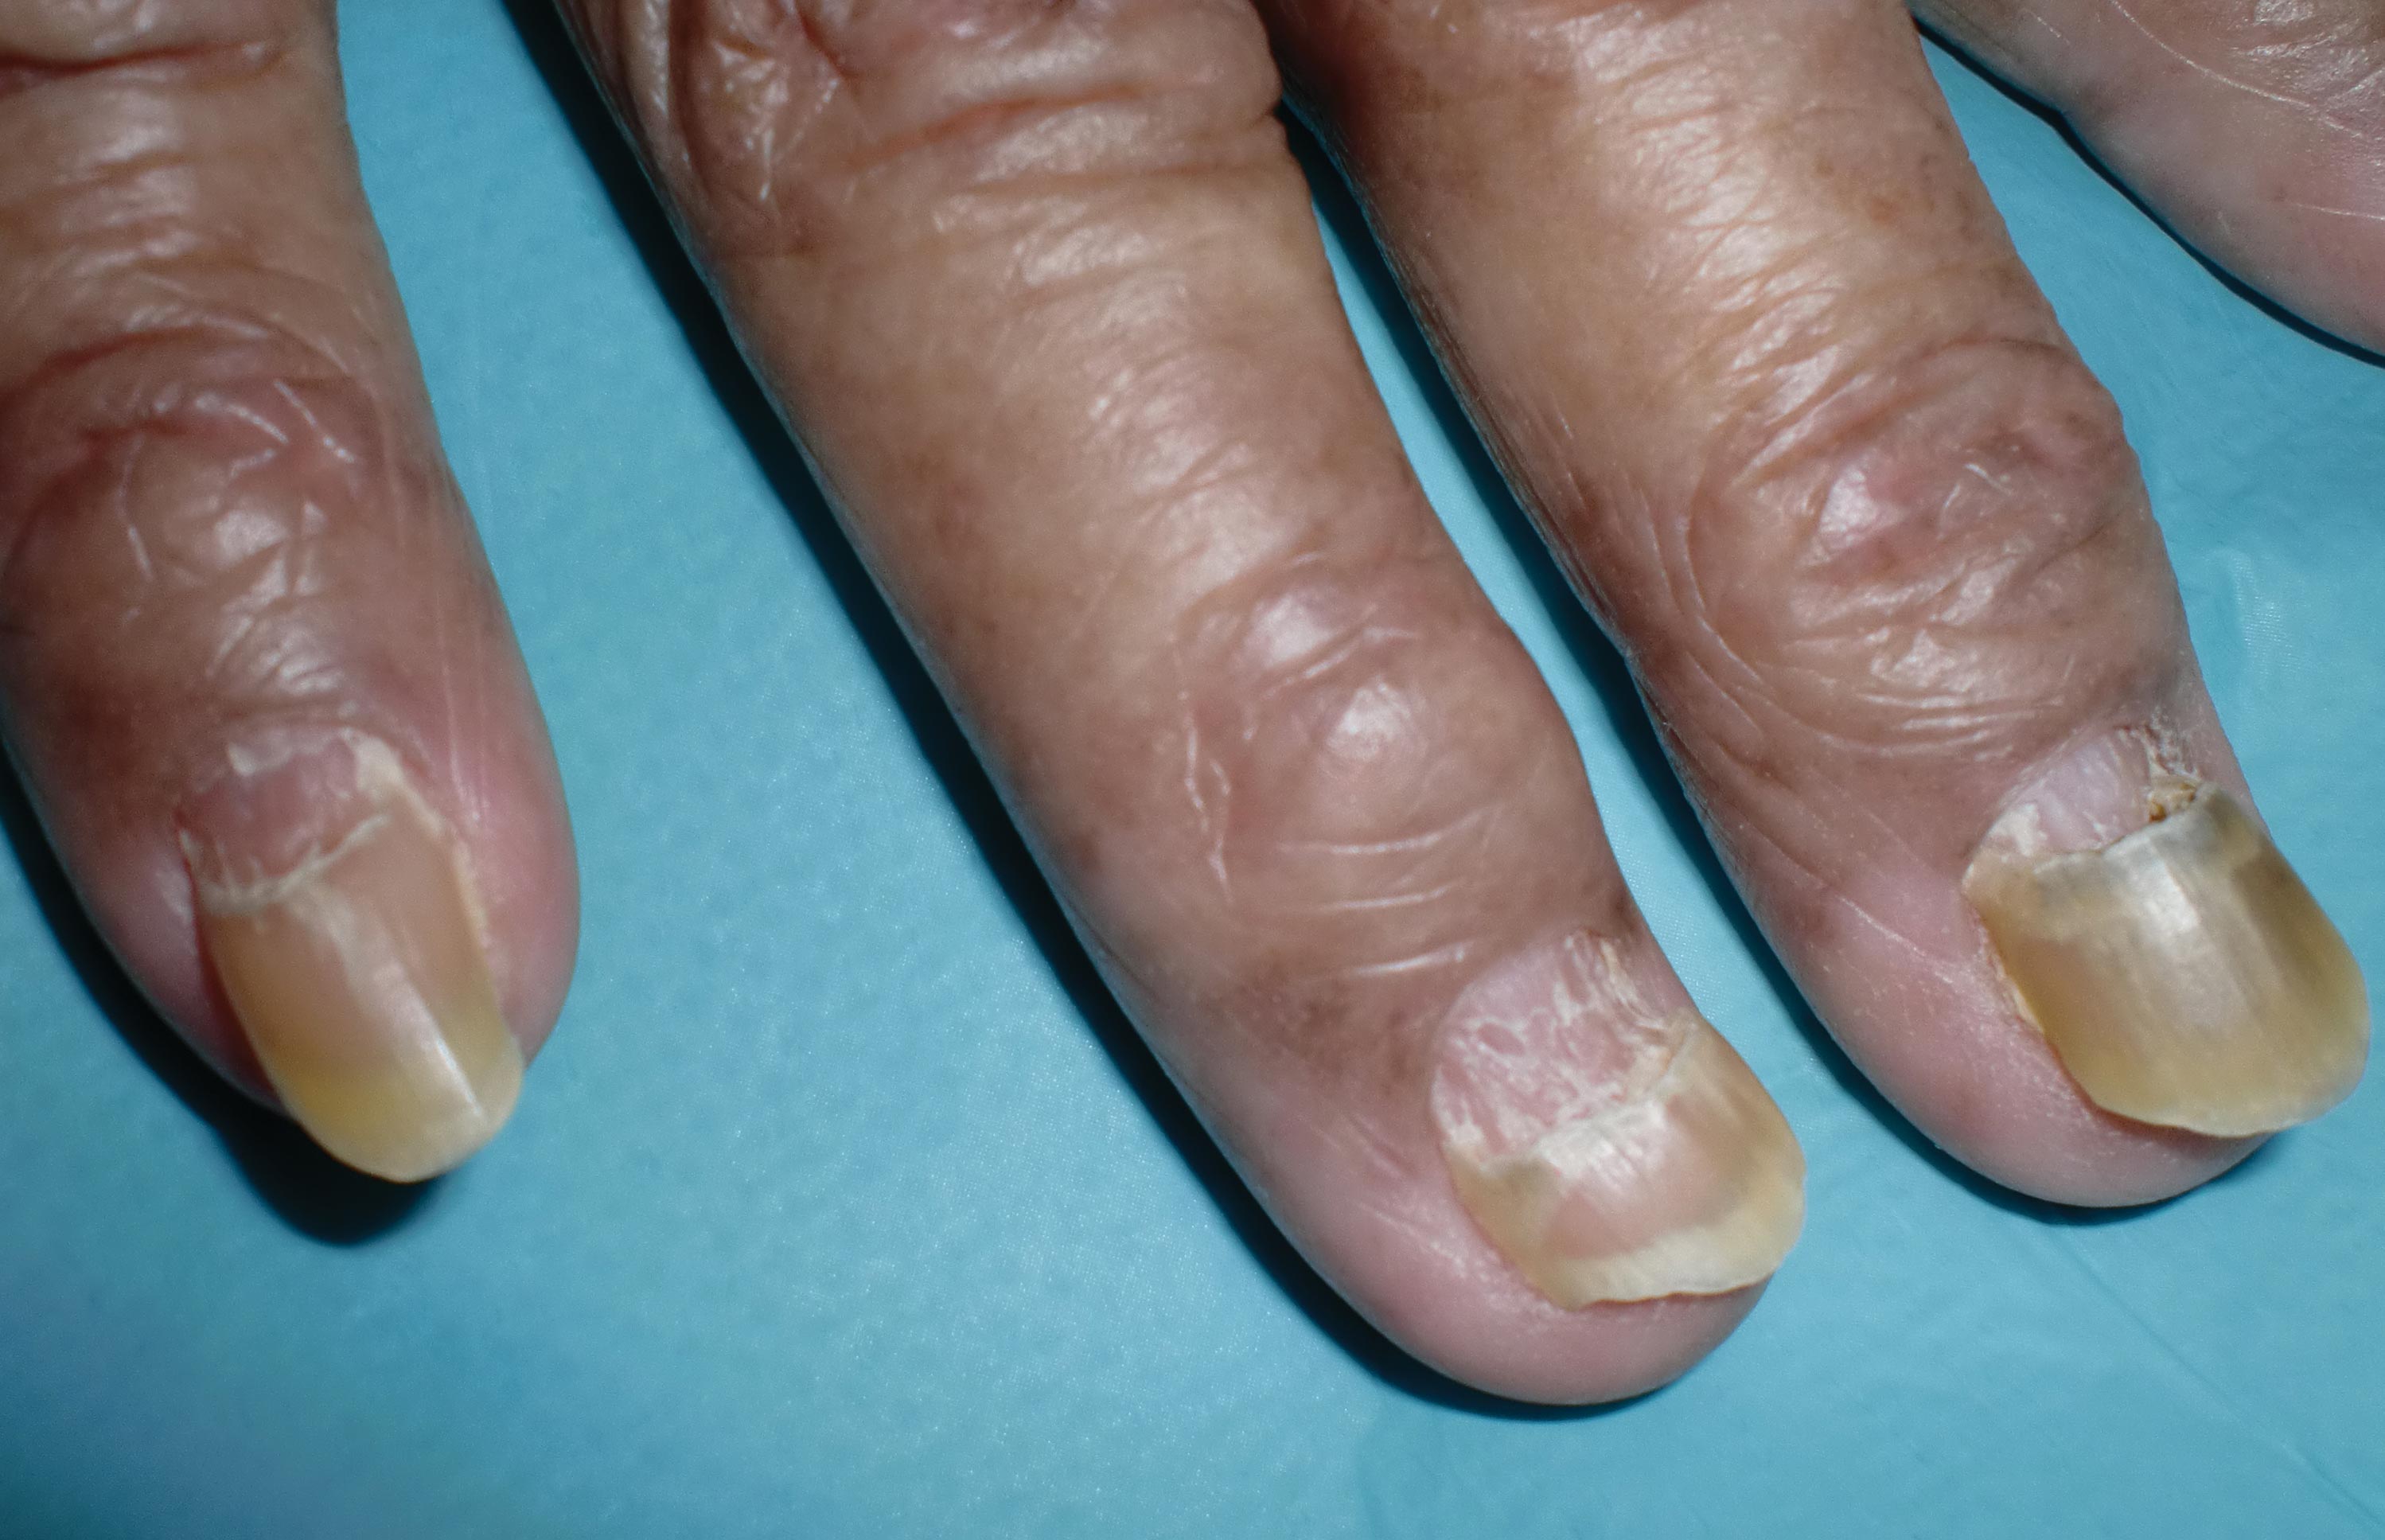 There is an urban myth that your fingernails continue to grow after death, which is supposed to explain why dead bodies often appear to have long nails.<br><br>The truth is that the soft tissues in the fingers and hands tend to contract as they lose moisture, leading to the appearance of growing nails. -Draculamb